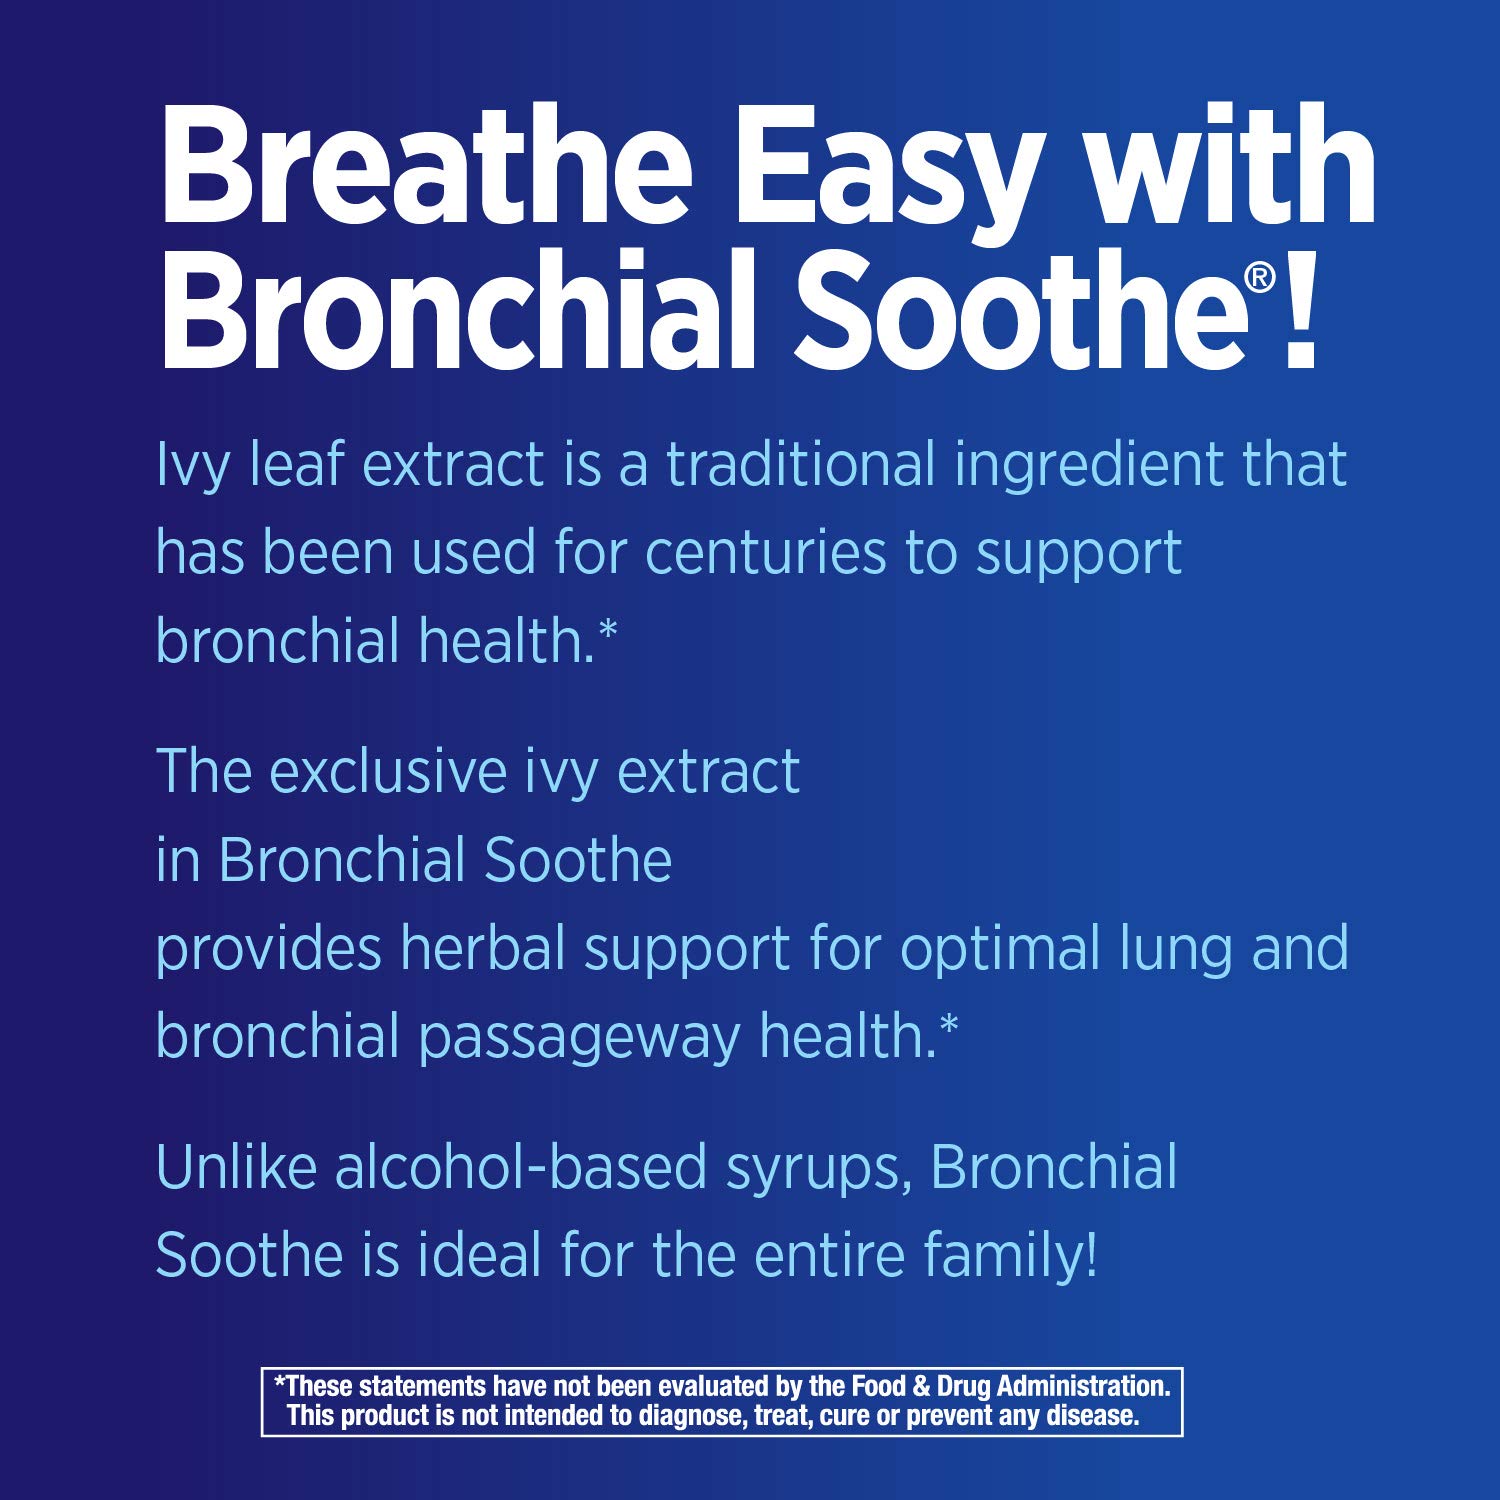 Nature's Way Bronchial Soothe Ivy Leaf 99.9% Alcohol-free Non-Drowsy Syrup, 120 ML (4 Fl Oz.)